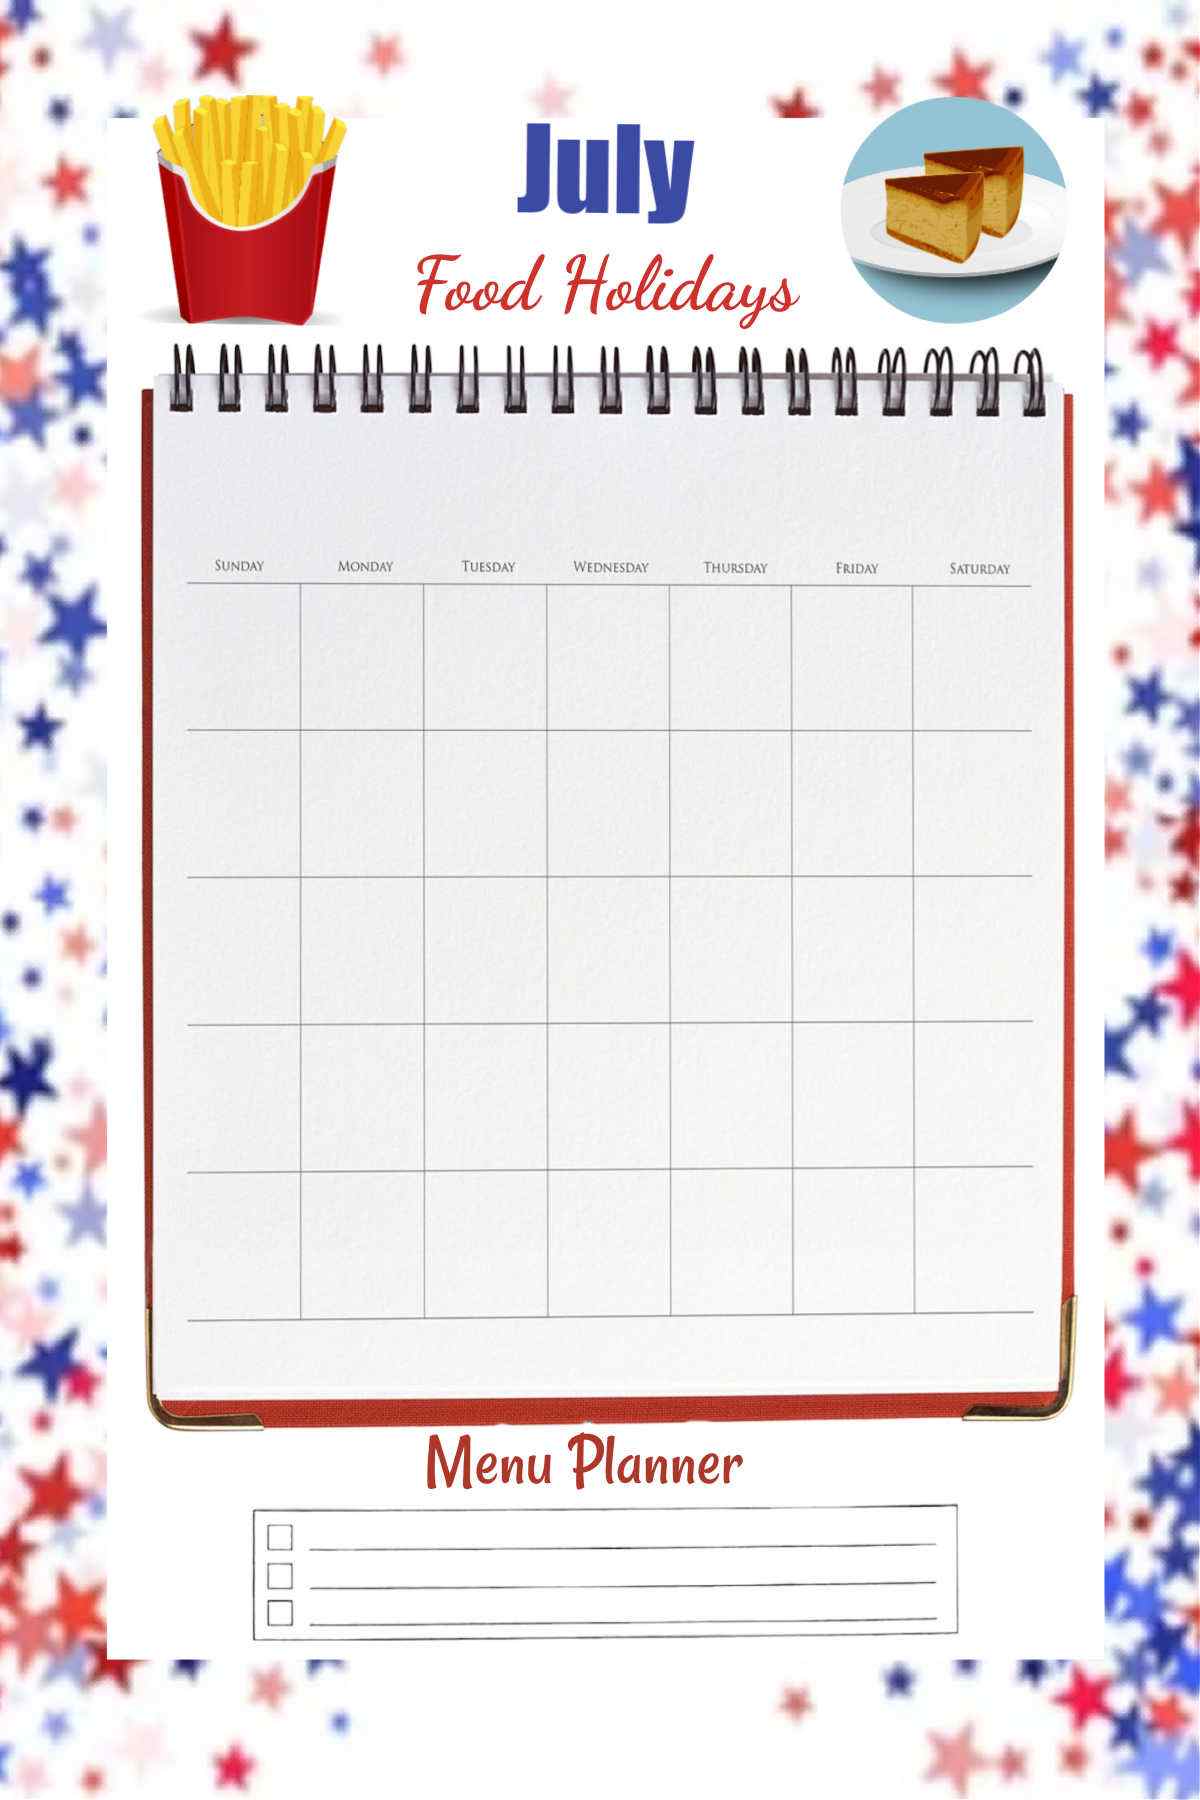 Patriotic background with a meal planner for July over the top.